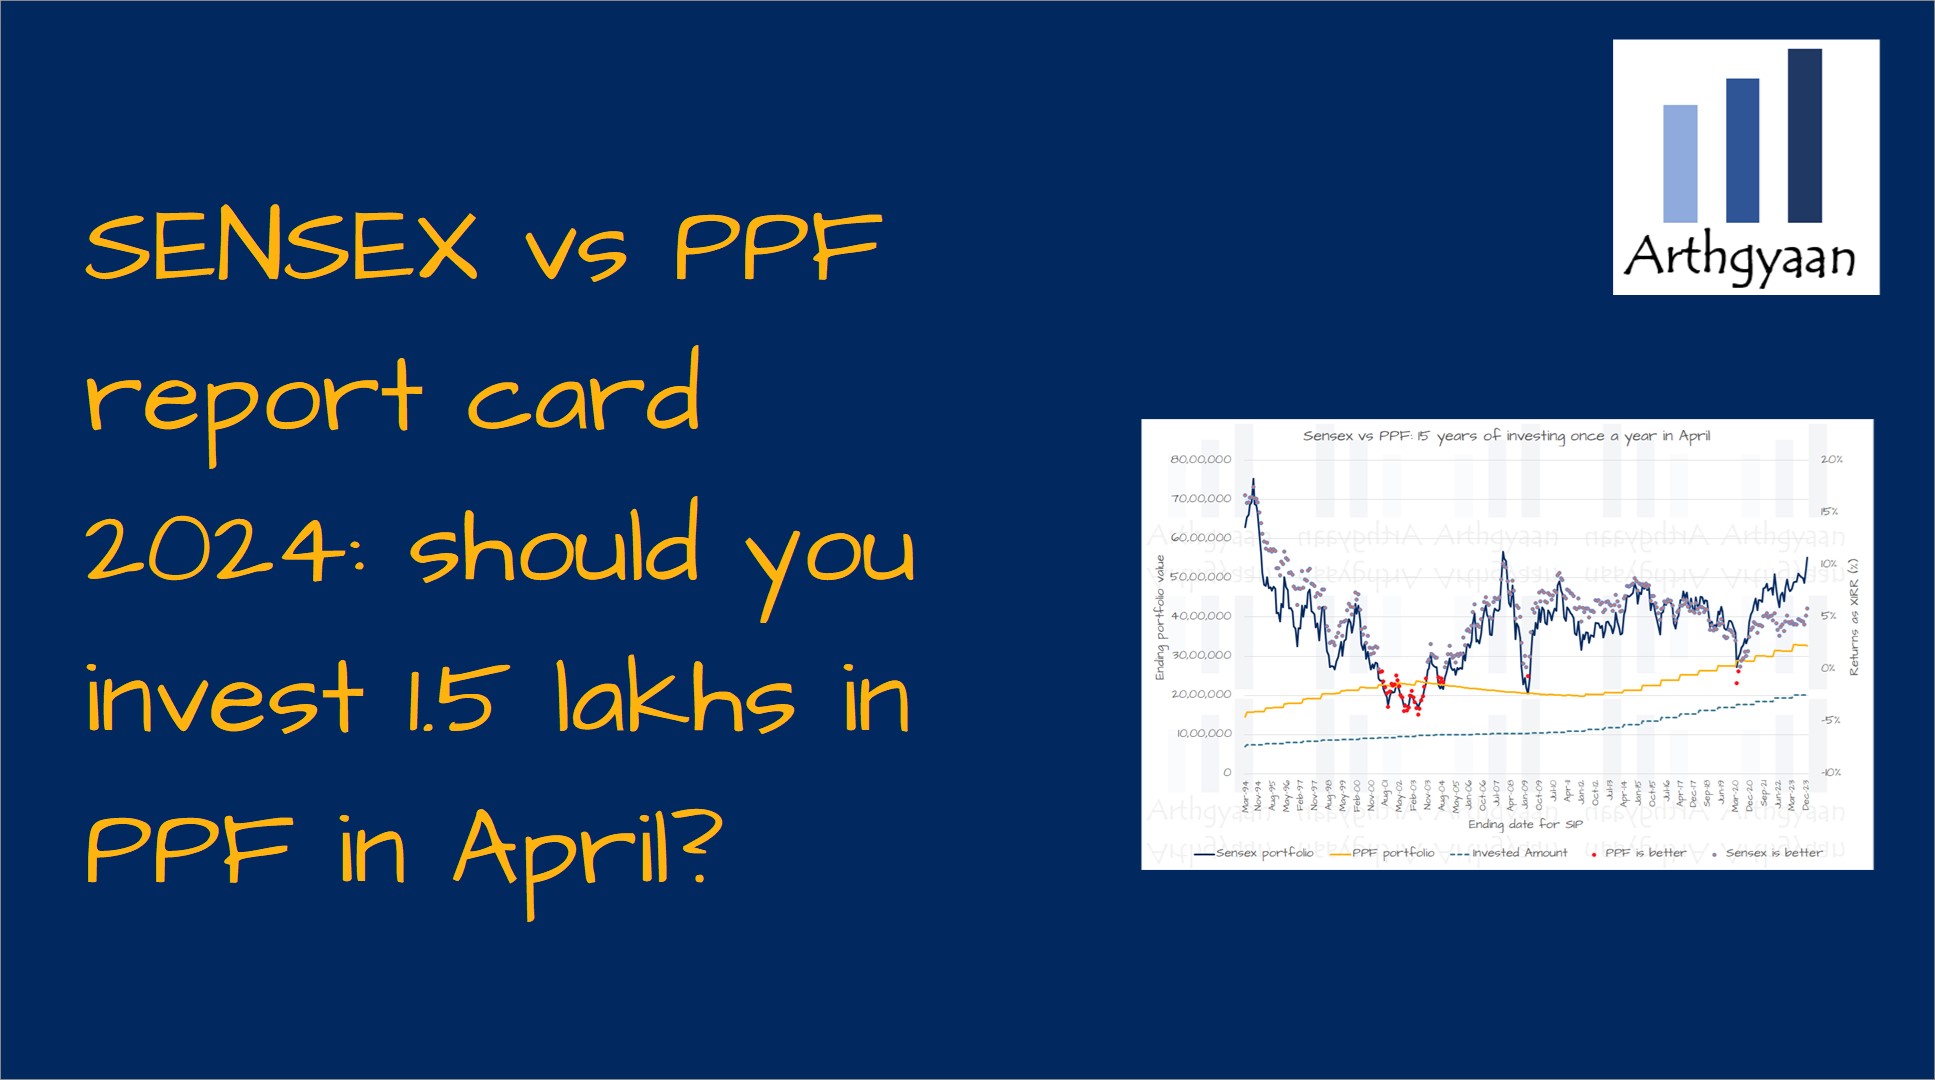 SENSEX vs PPF report card 2024: should you invest 1.5 lakhs in PPF in April?